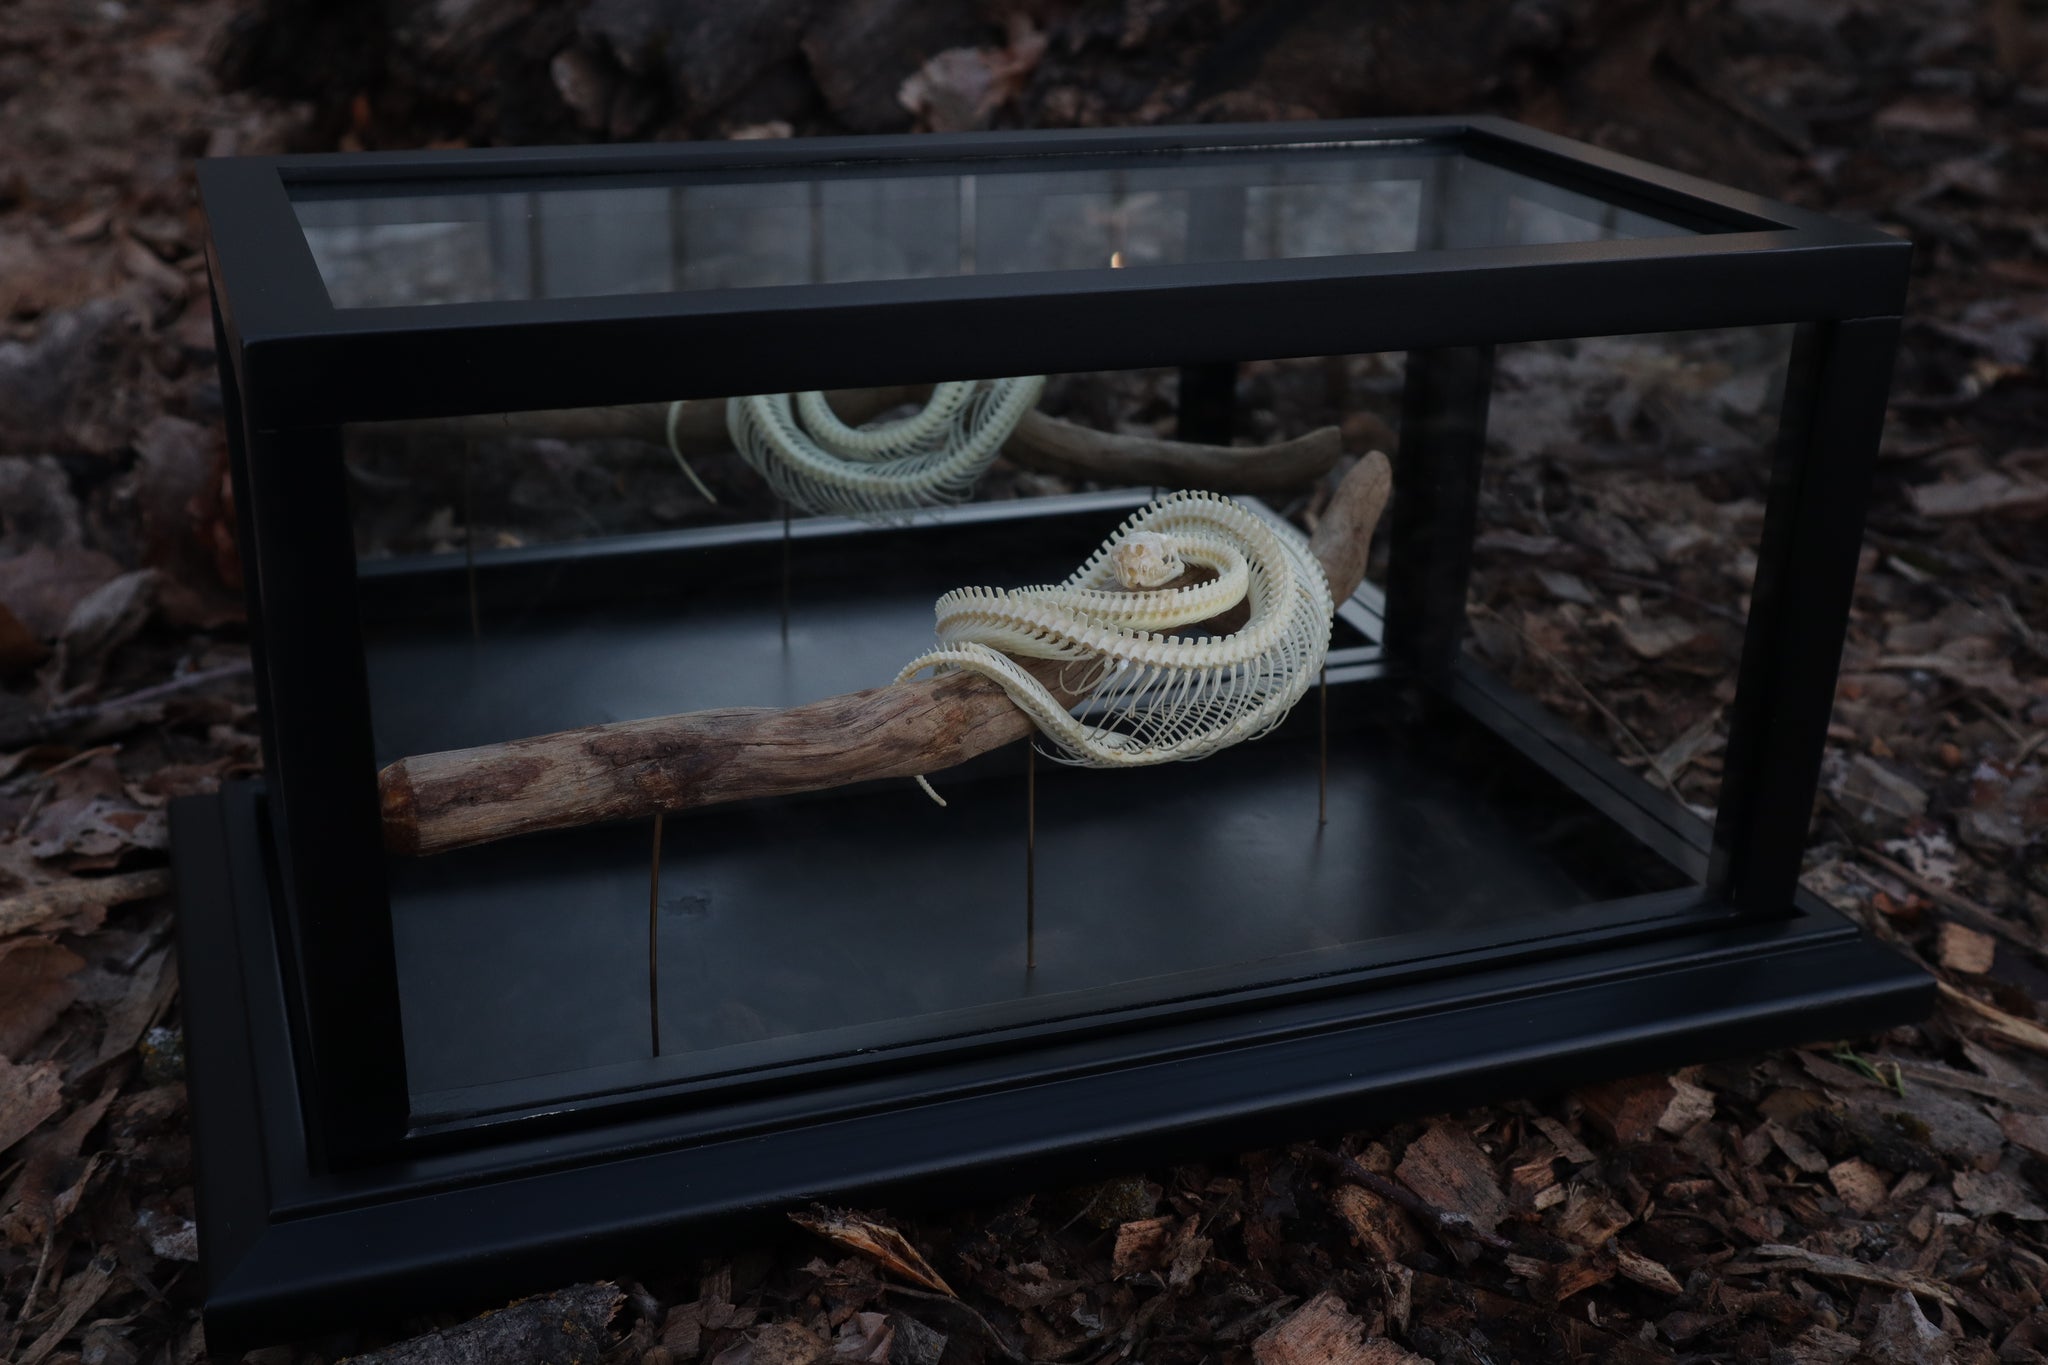 Baby Ball Python Articulation in Glass Display Case